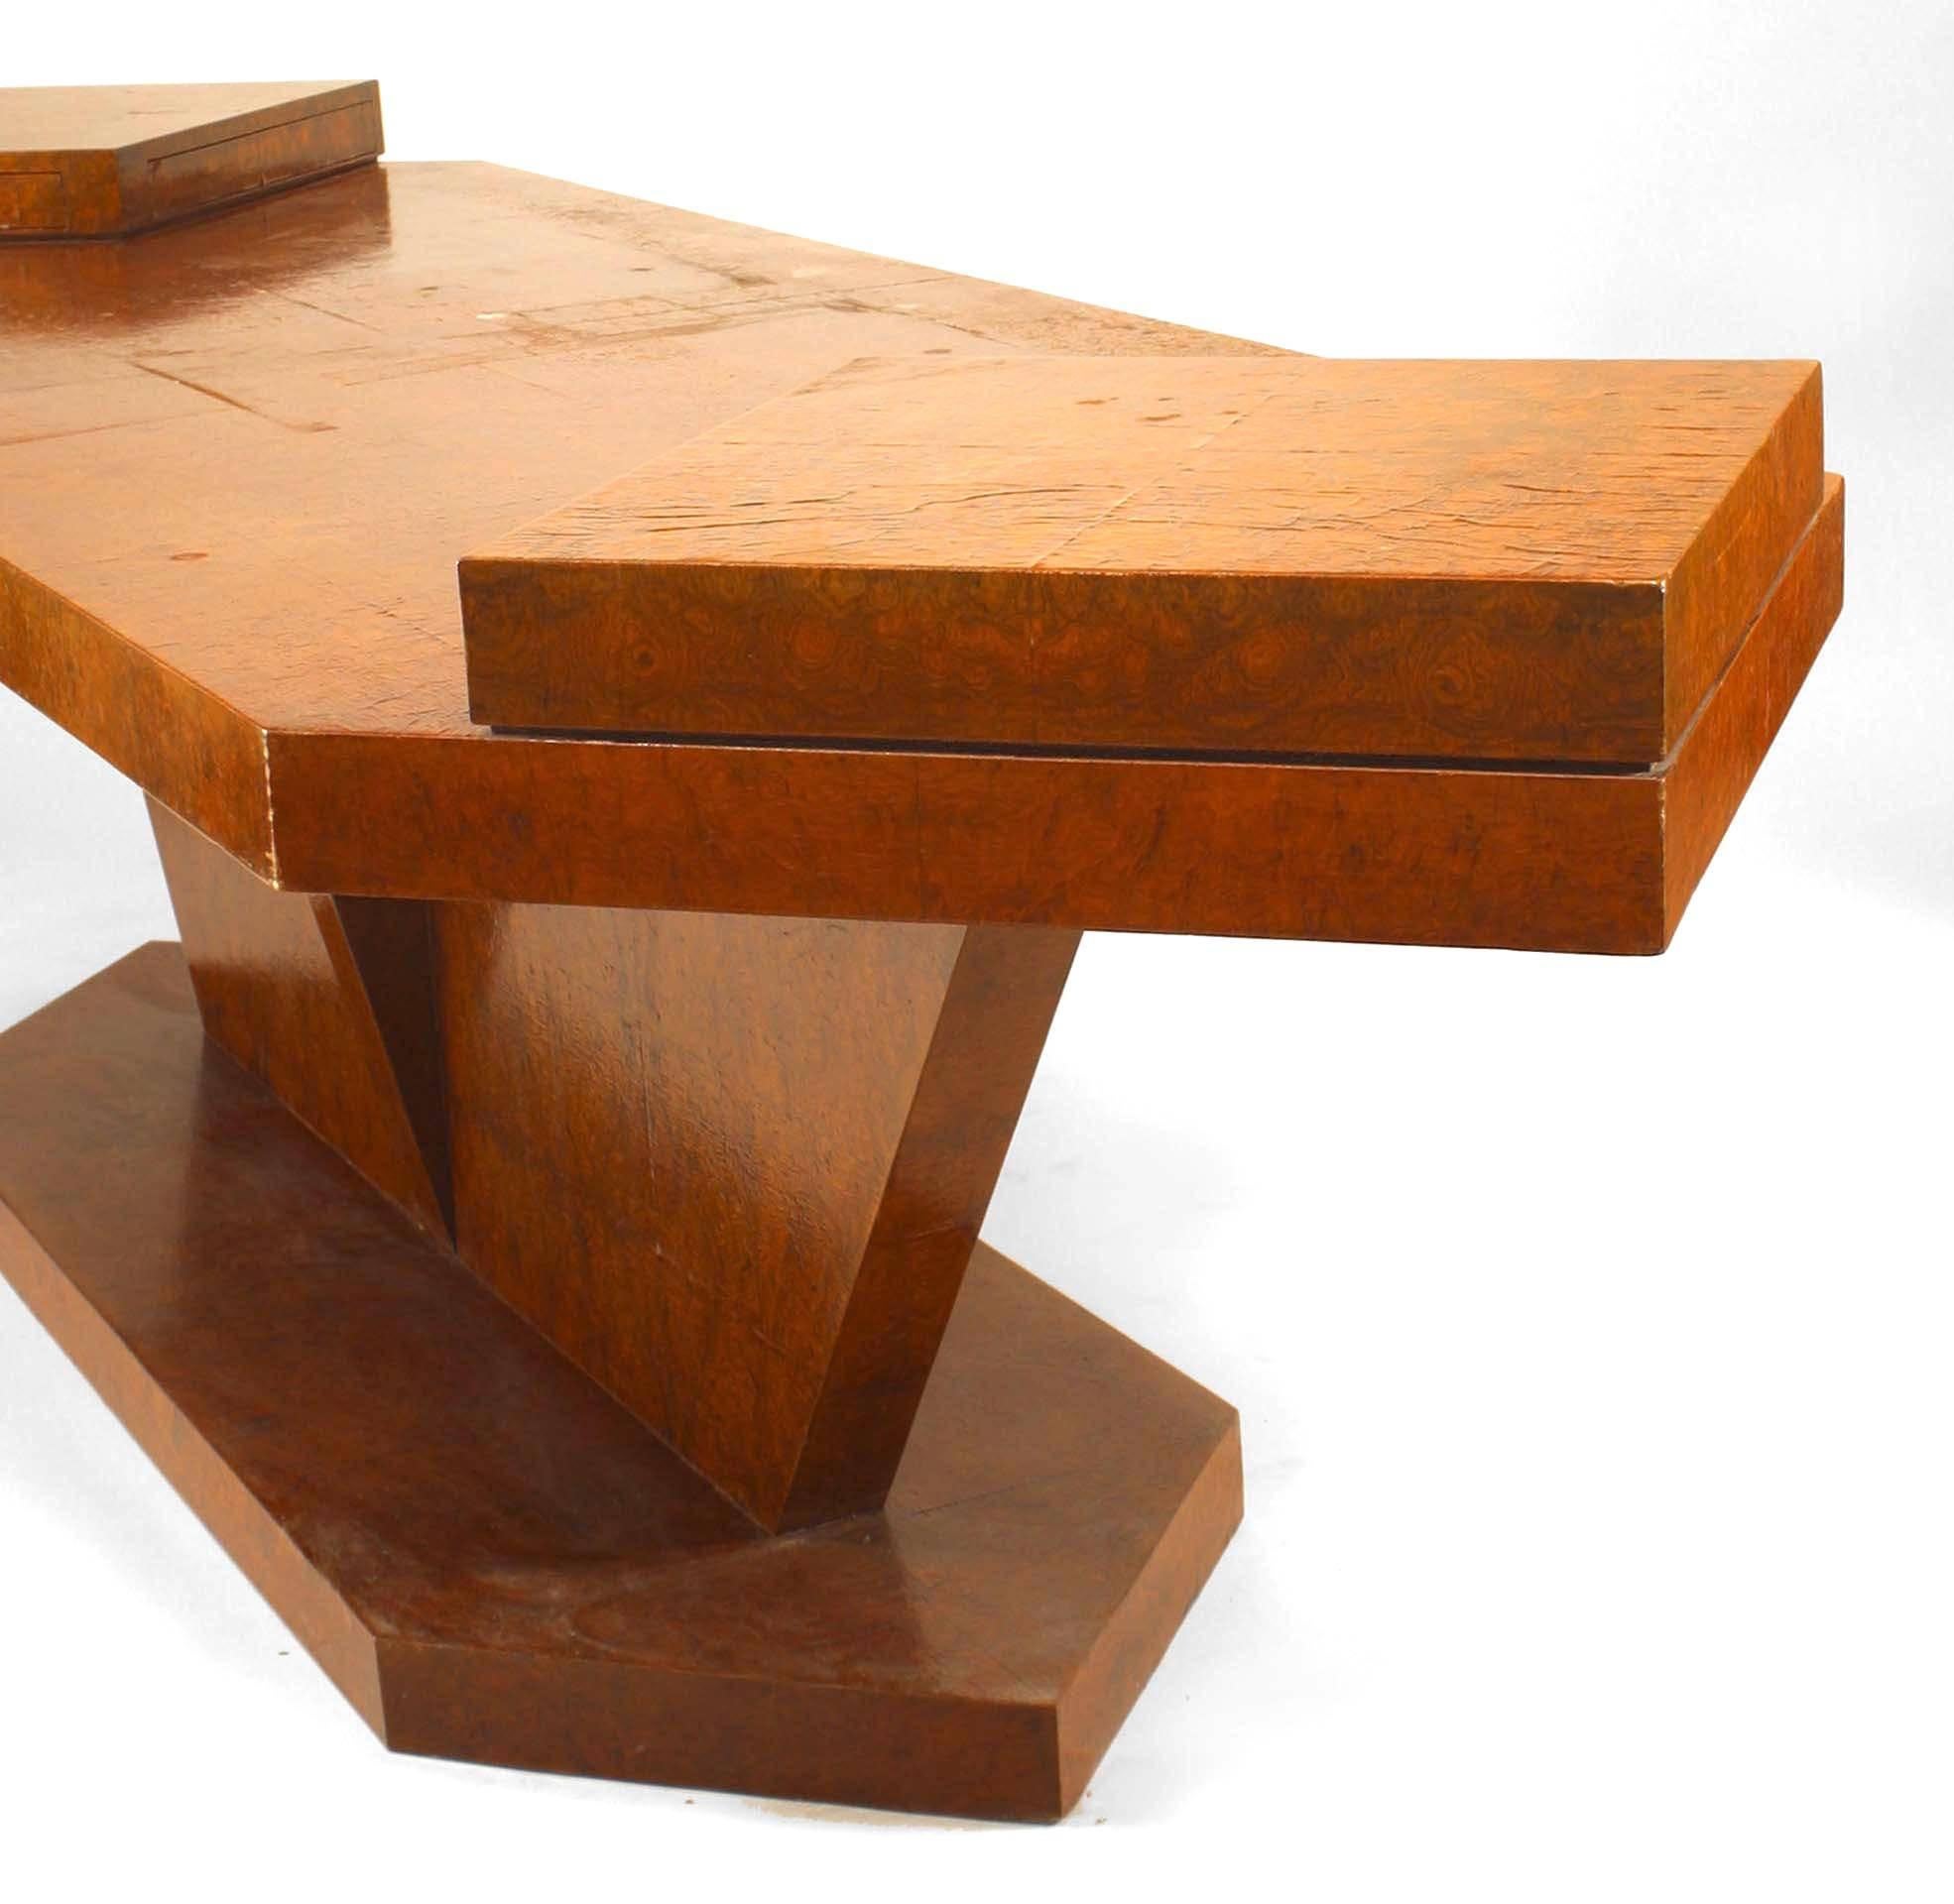 Italian 1940s burl birch rectangular conference table with an angular pedestal and base with 2 raised drawers on either end (Attributed to Carlo De Carli, Renato Angeli, & Luigi Olivieri)
